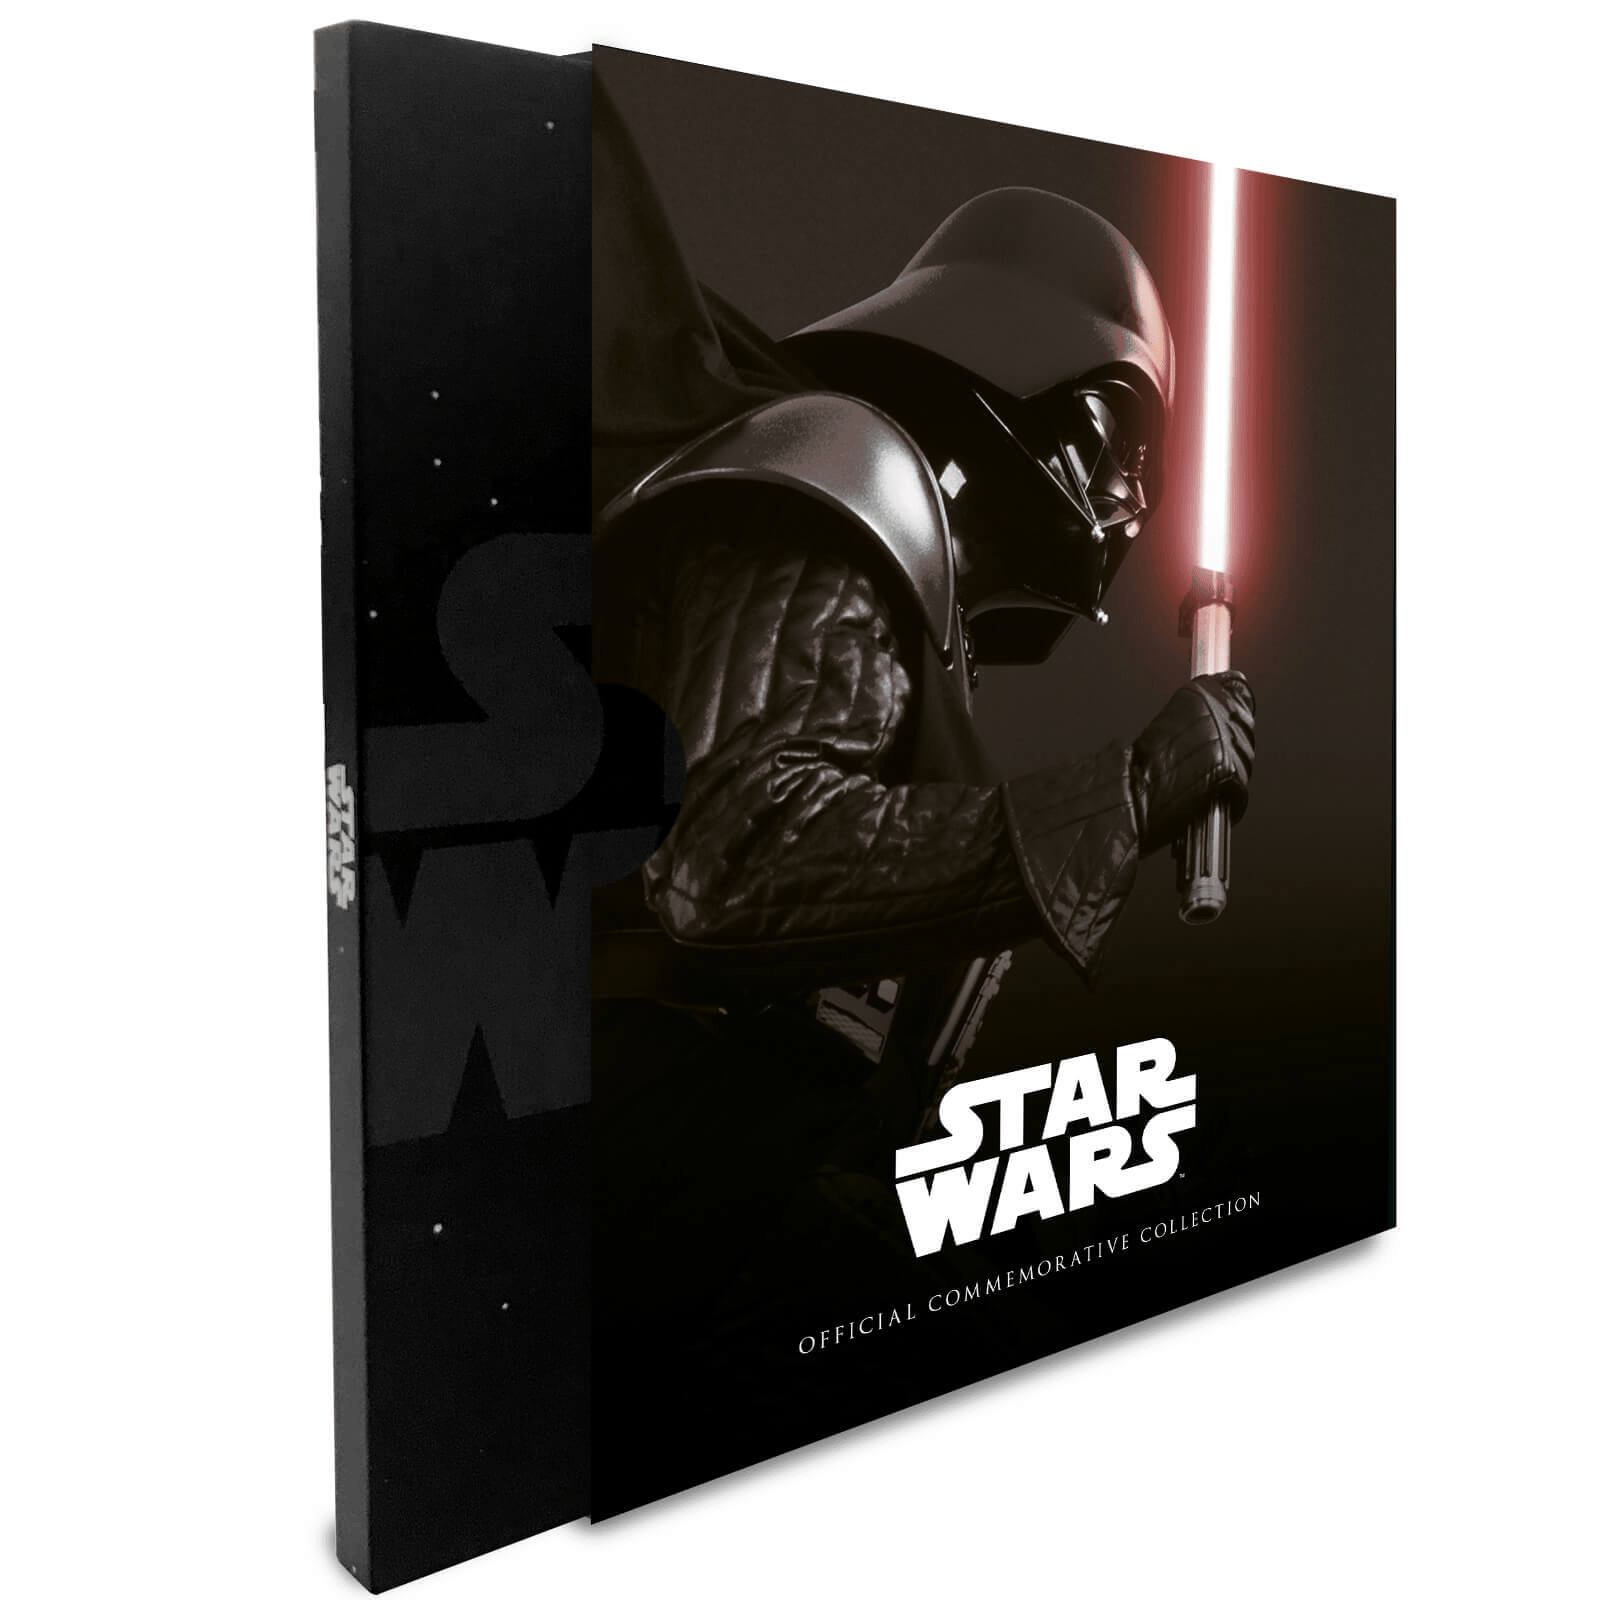 Star Wars Coin Advent Calendar Reviews Get All The Details At Hello